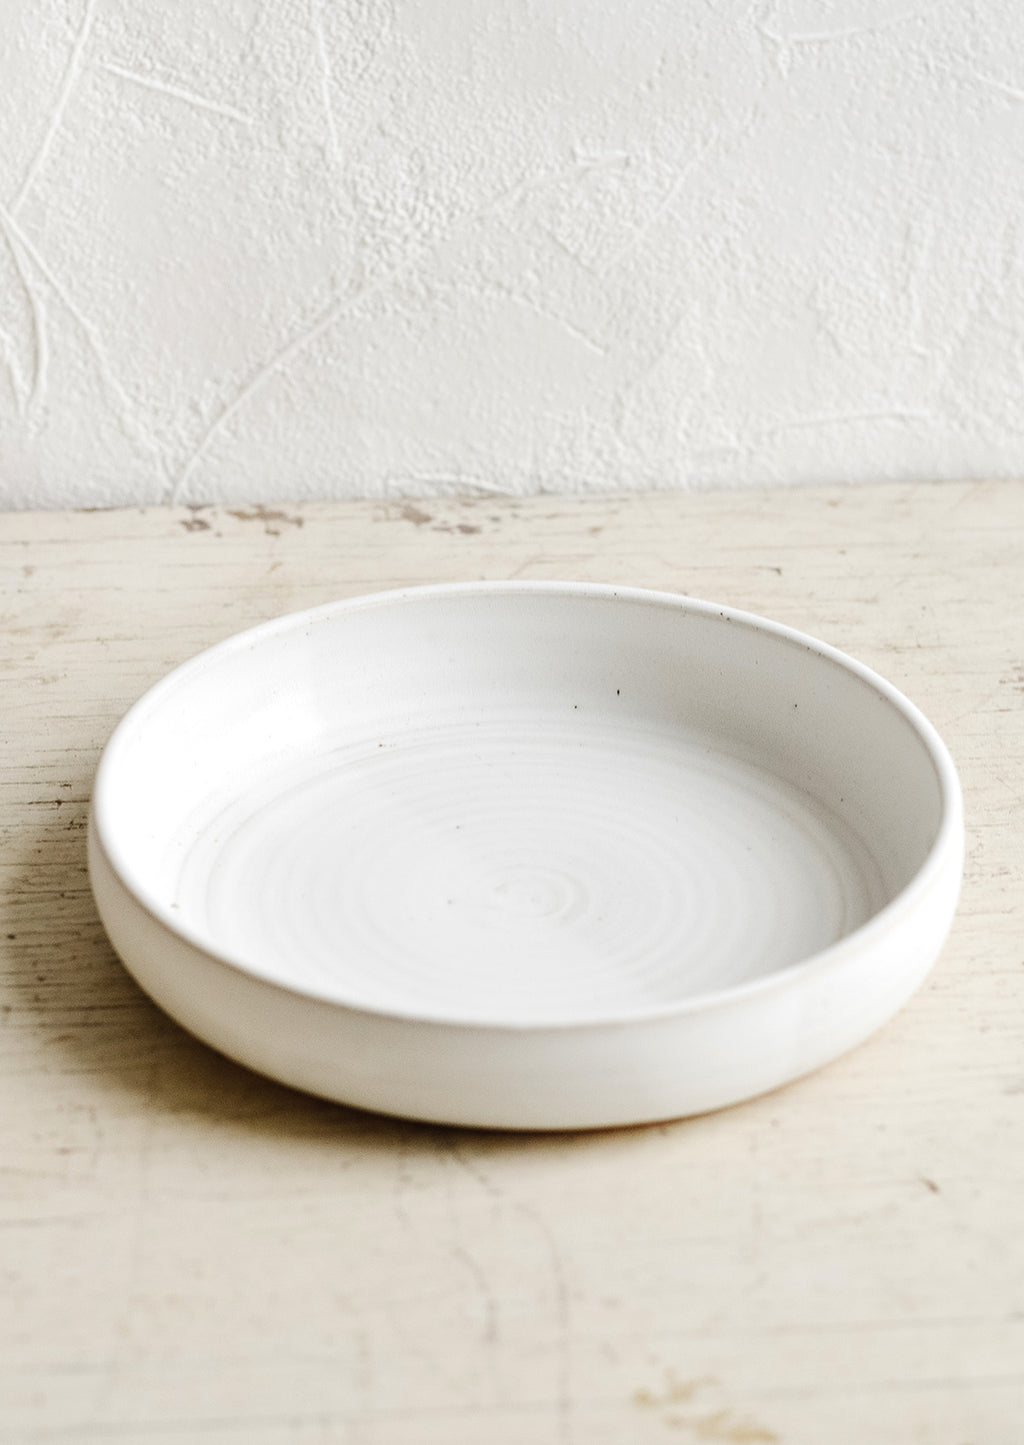 Matte White / Noodle Bowl: A shallow and wide ceramic bowl in a matte white glaze.